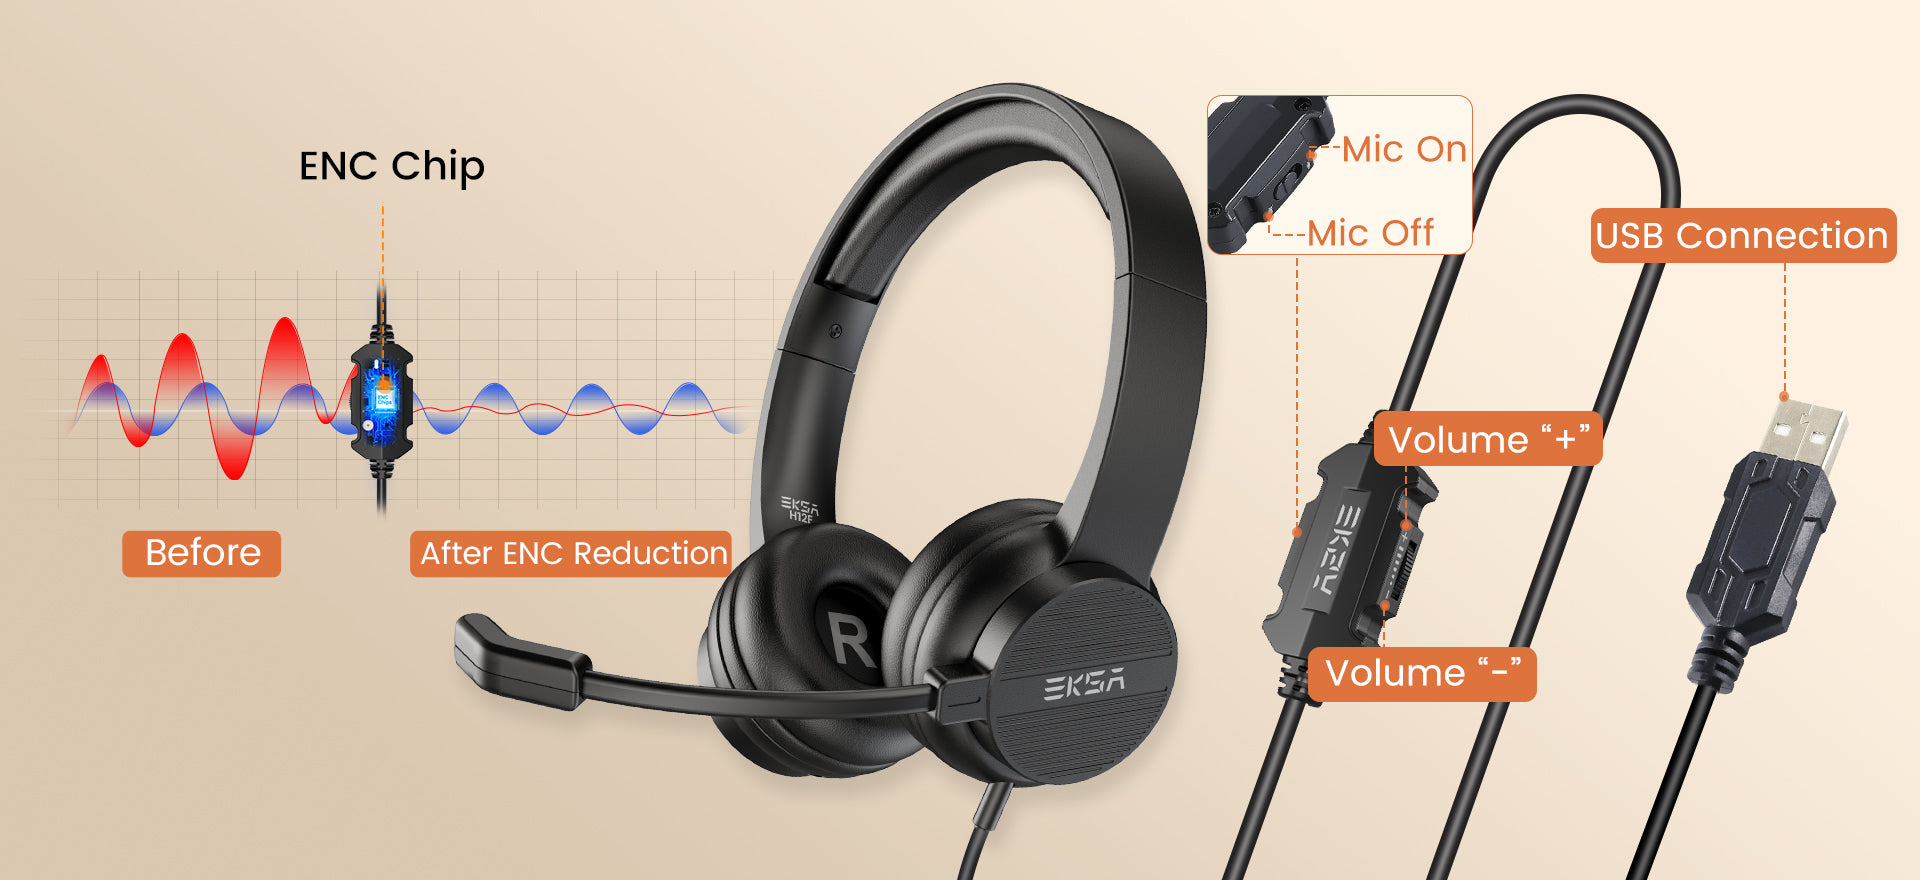 2.1m/6.9ft cable with mic mute and volume controls, providing freedom from short cables during work.